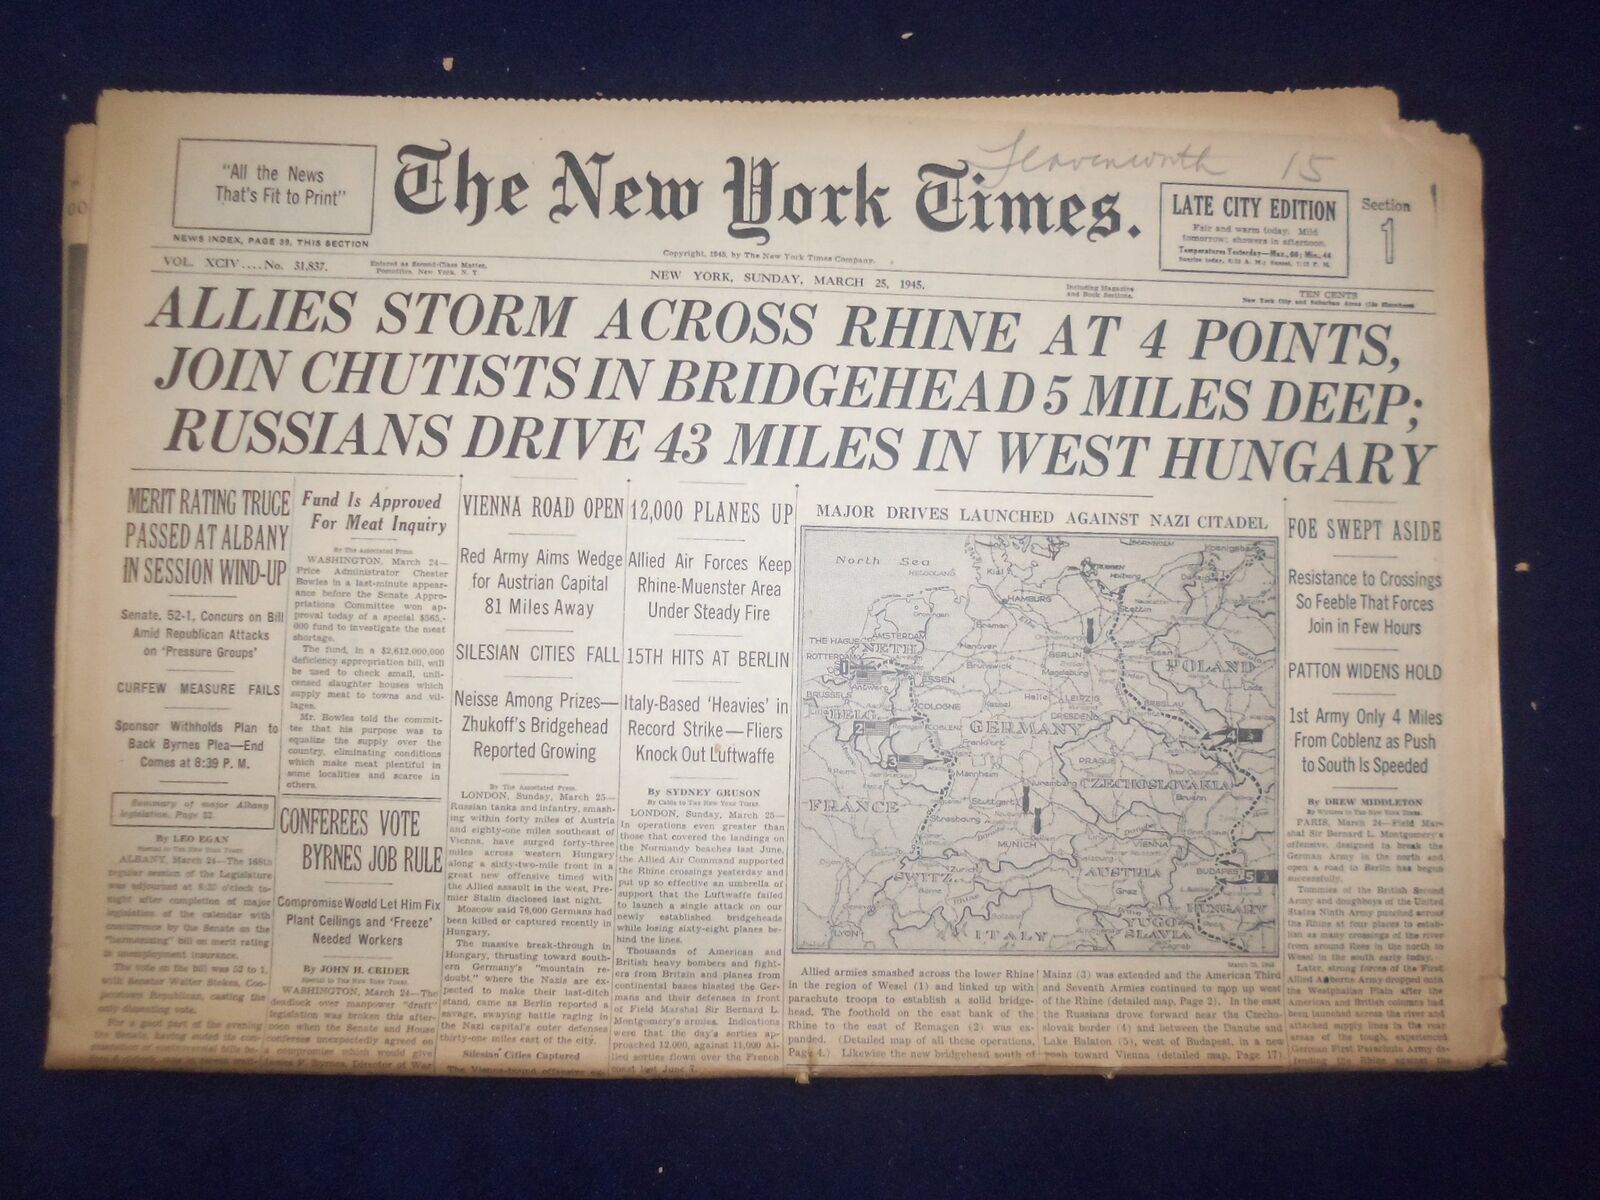 1945 MARCH 25 NEW YORK TIMES - ALLIES STORM ACROSS RHINE AT 4 POINTS - NP 6676